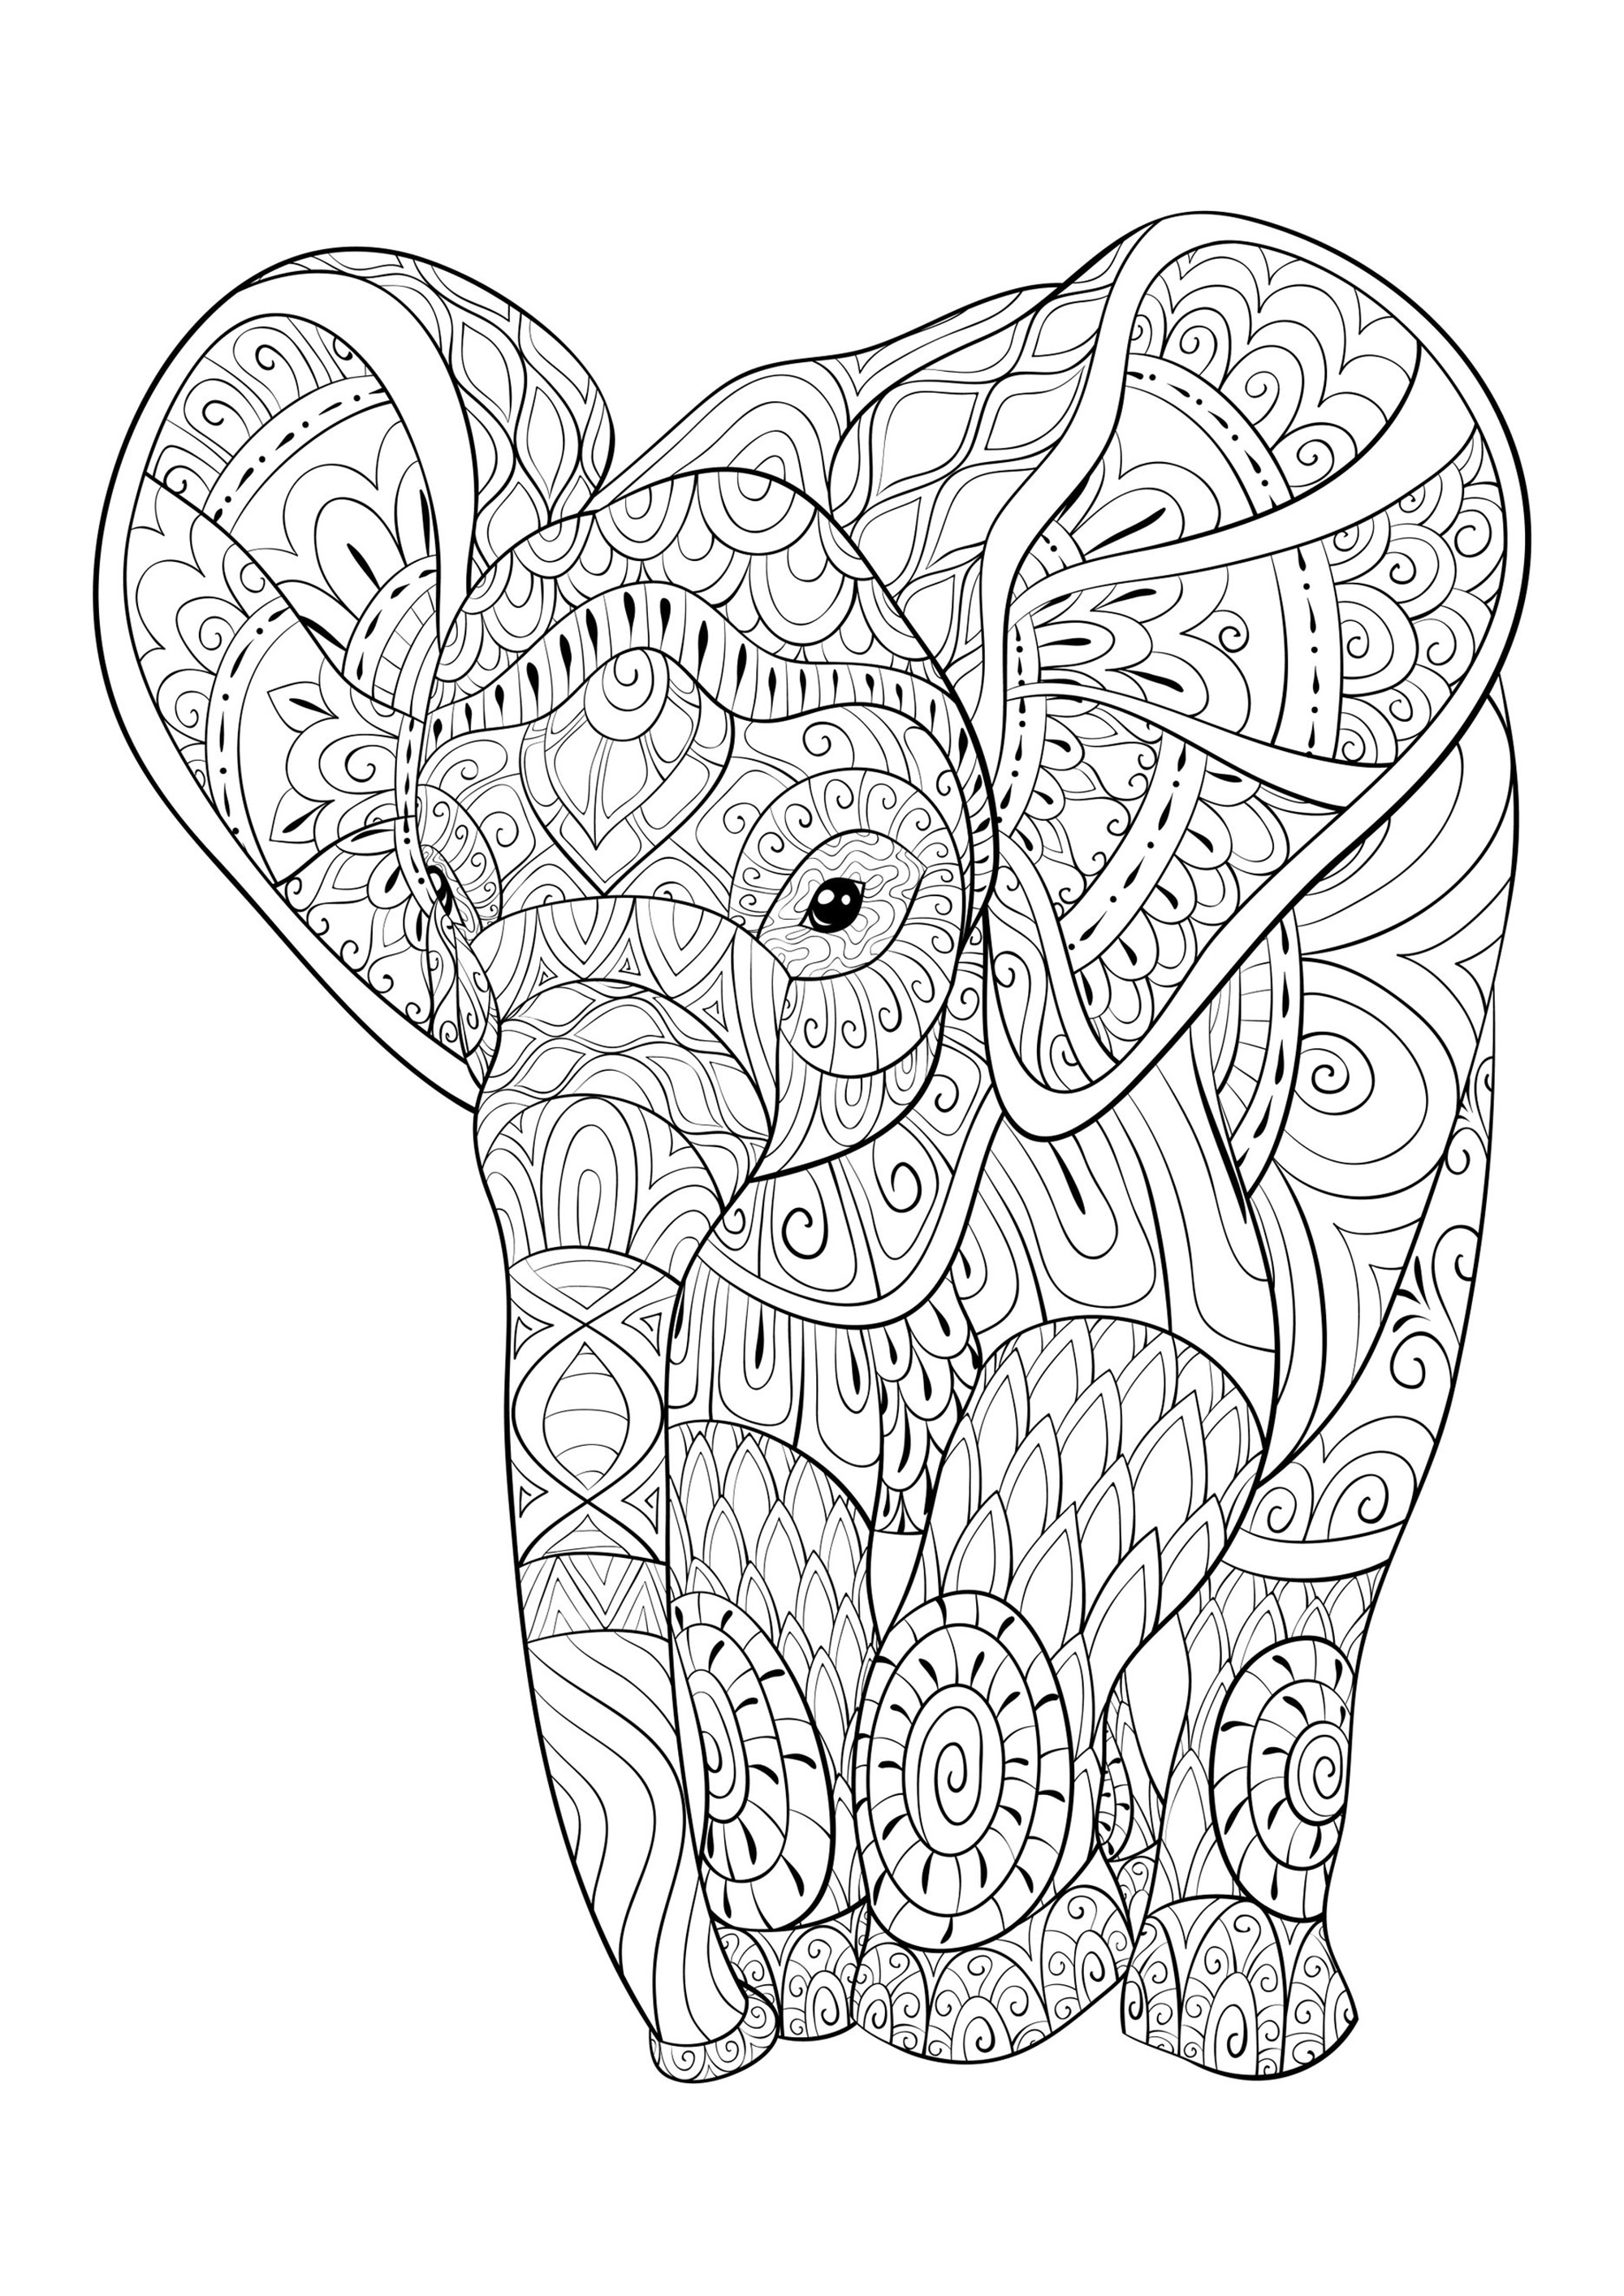 Young elephant full of beautiful patterns to color, Artist : Nonuzza   Source : 123rf